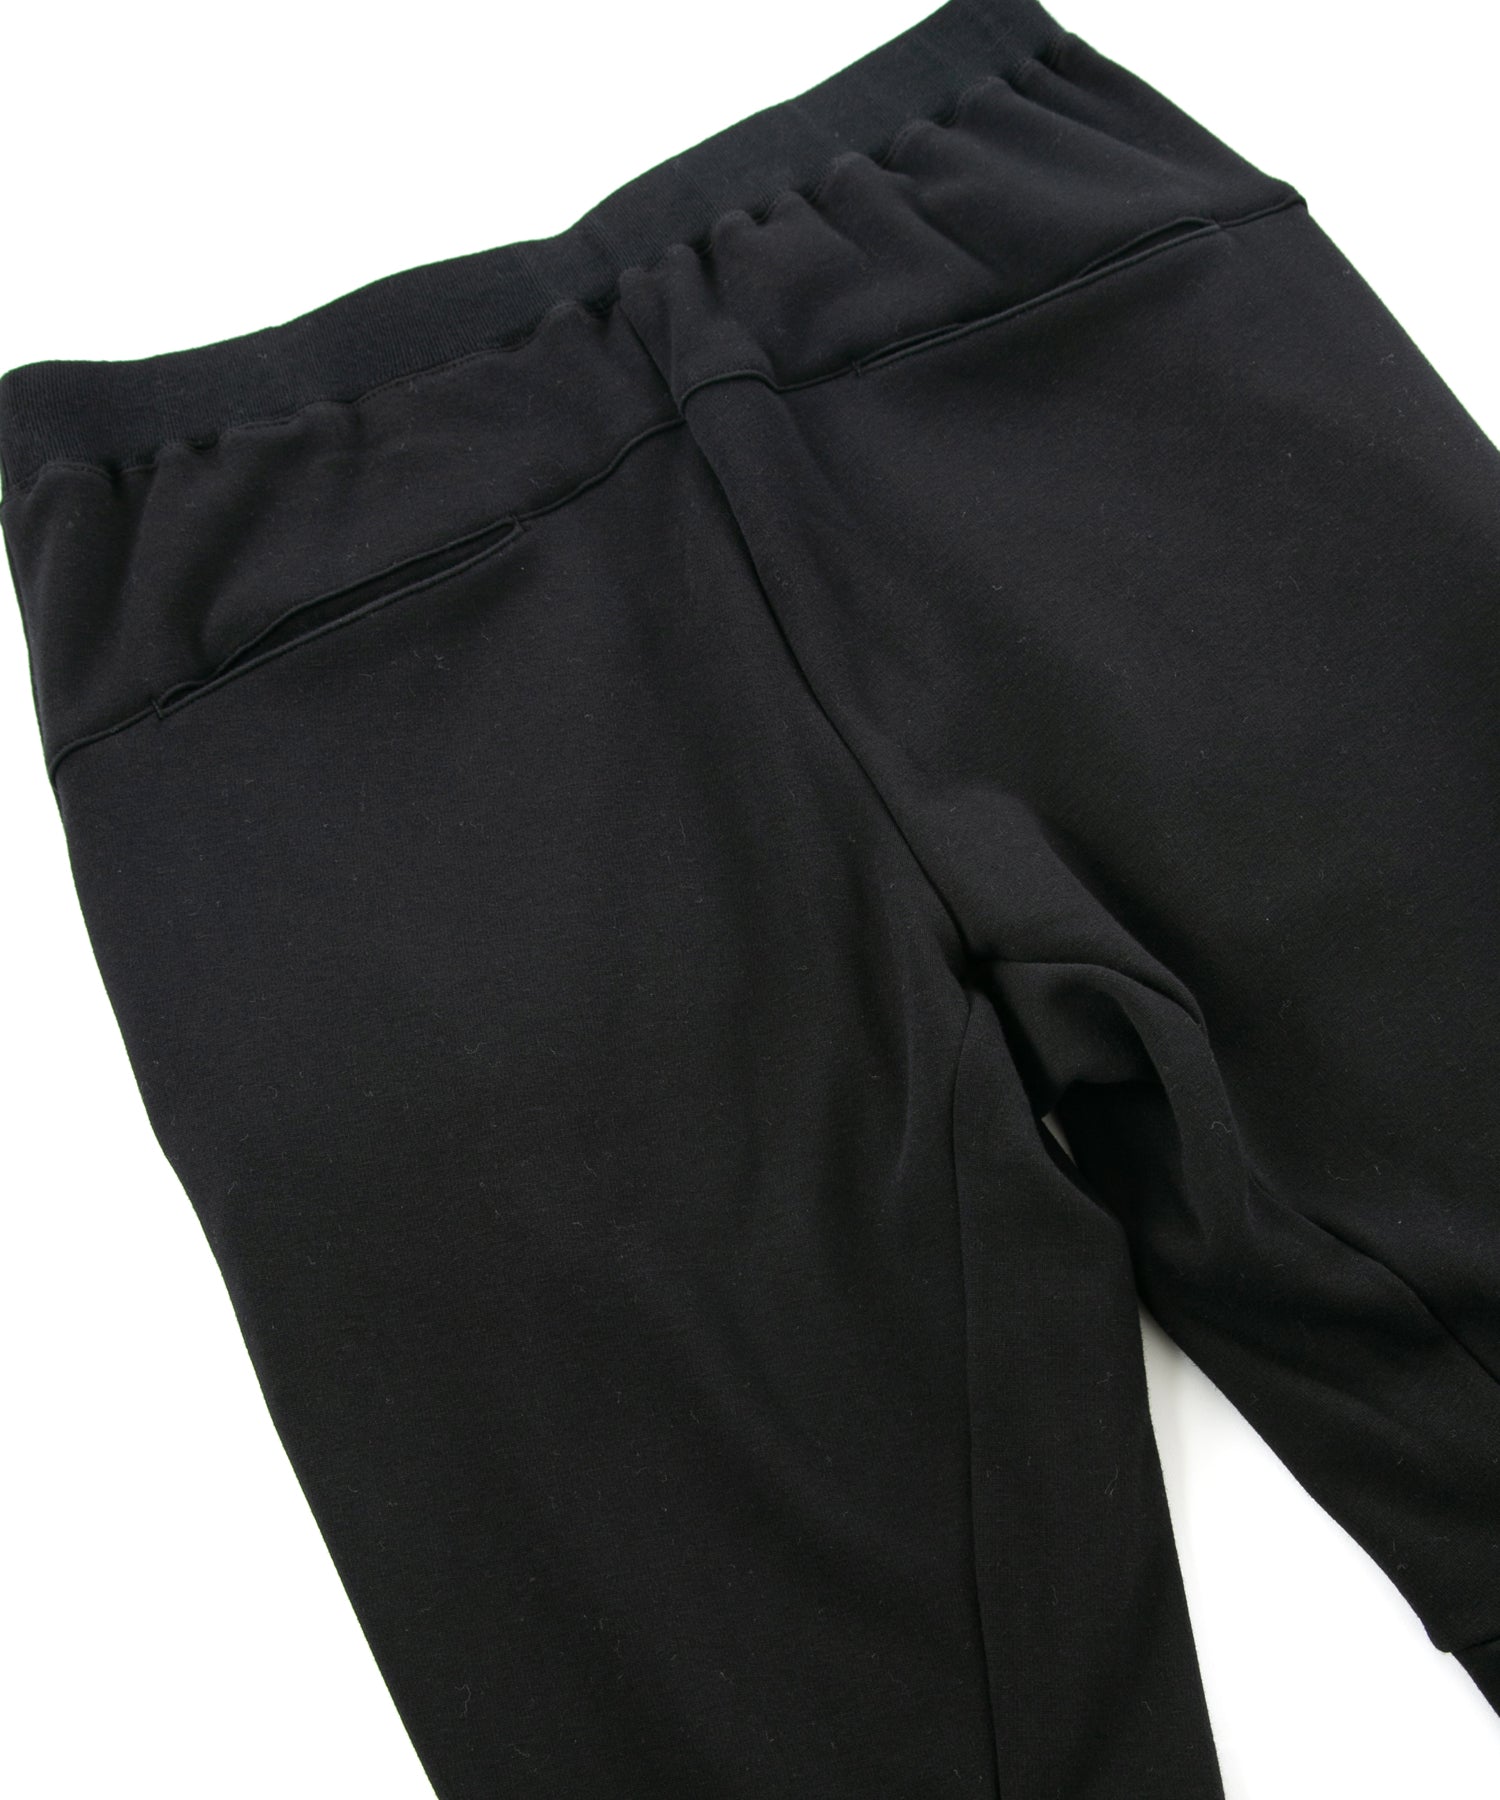 Load image into Gallery viewer, Stretch Cotton Polyester Knit Backside Velor finish Sweat pants - BLACK